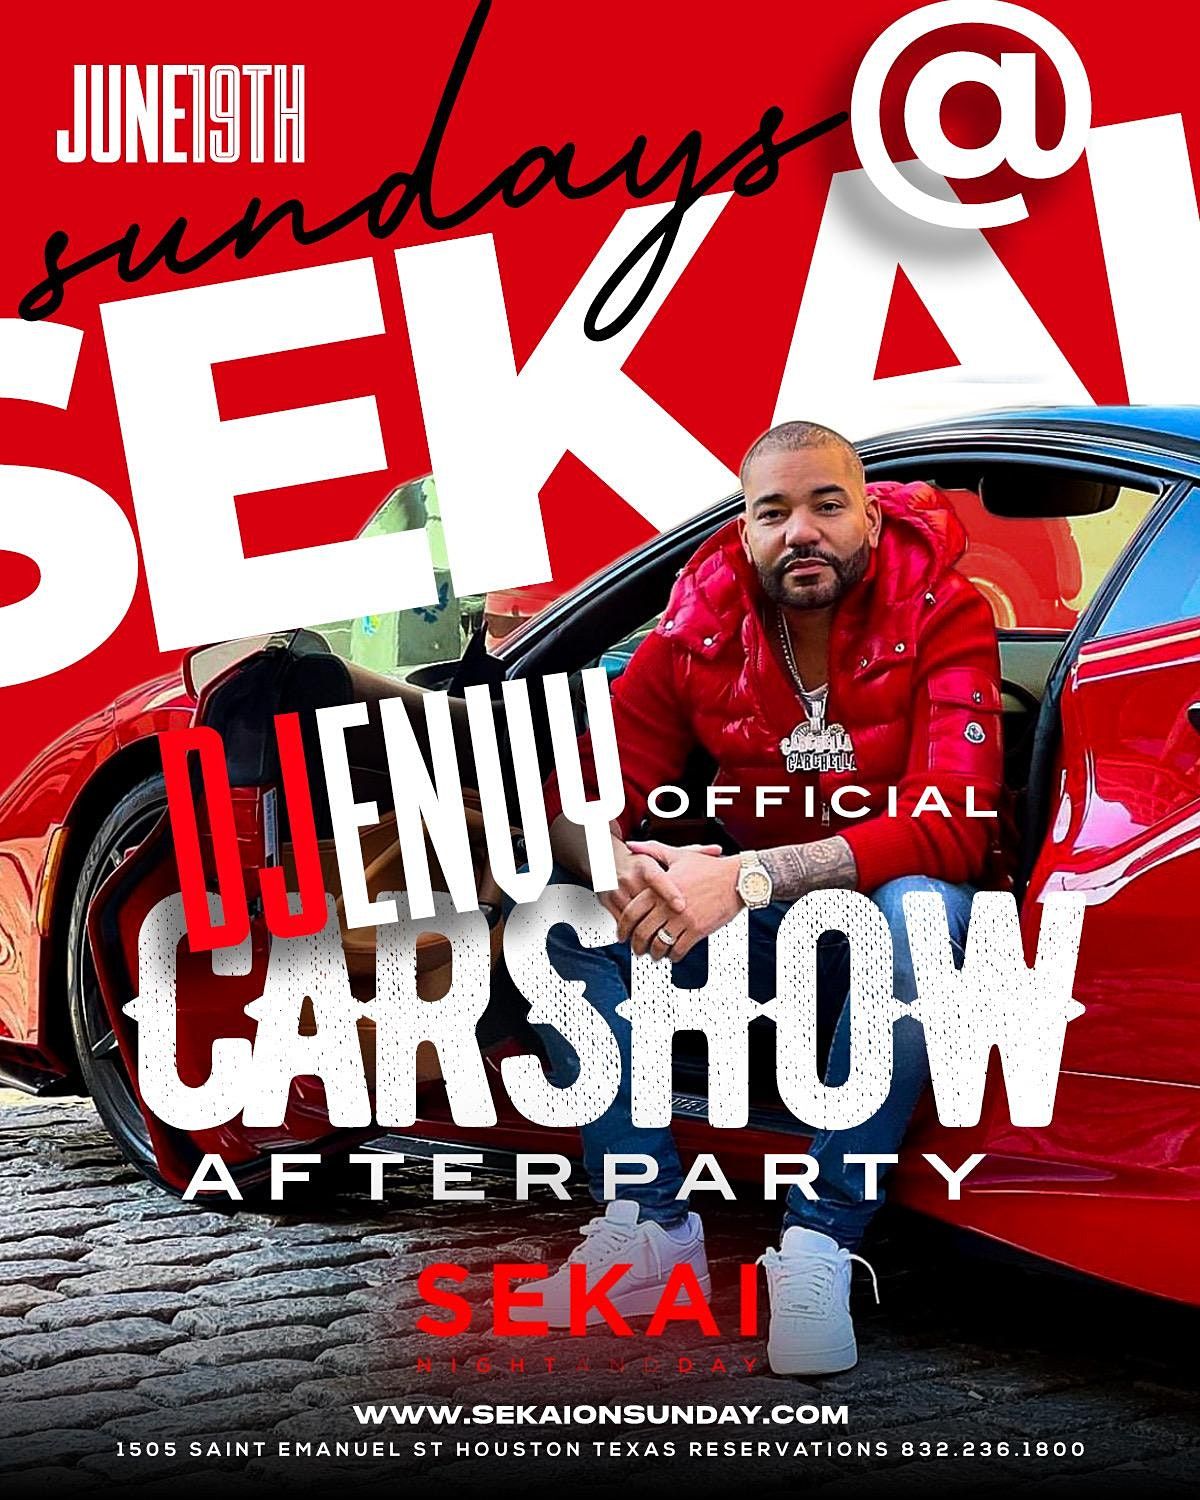 DJ ENVY Carshow afterparty Sekai on Sundays Houston's | RSVP For FREE entry